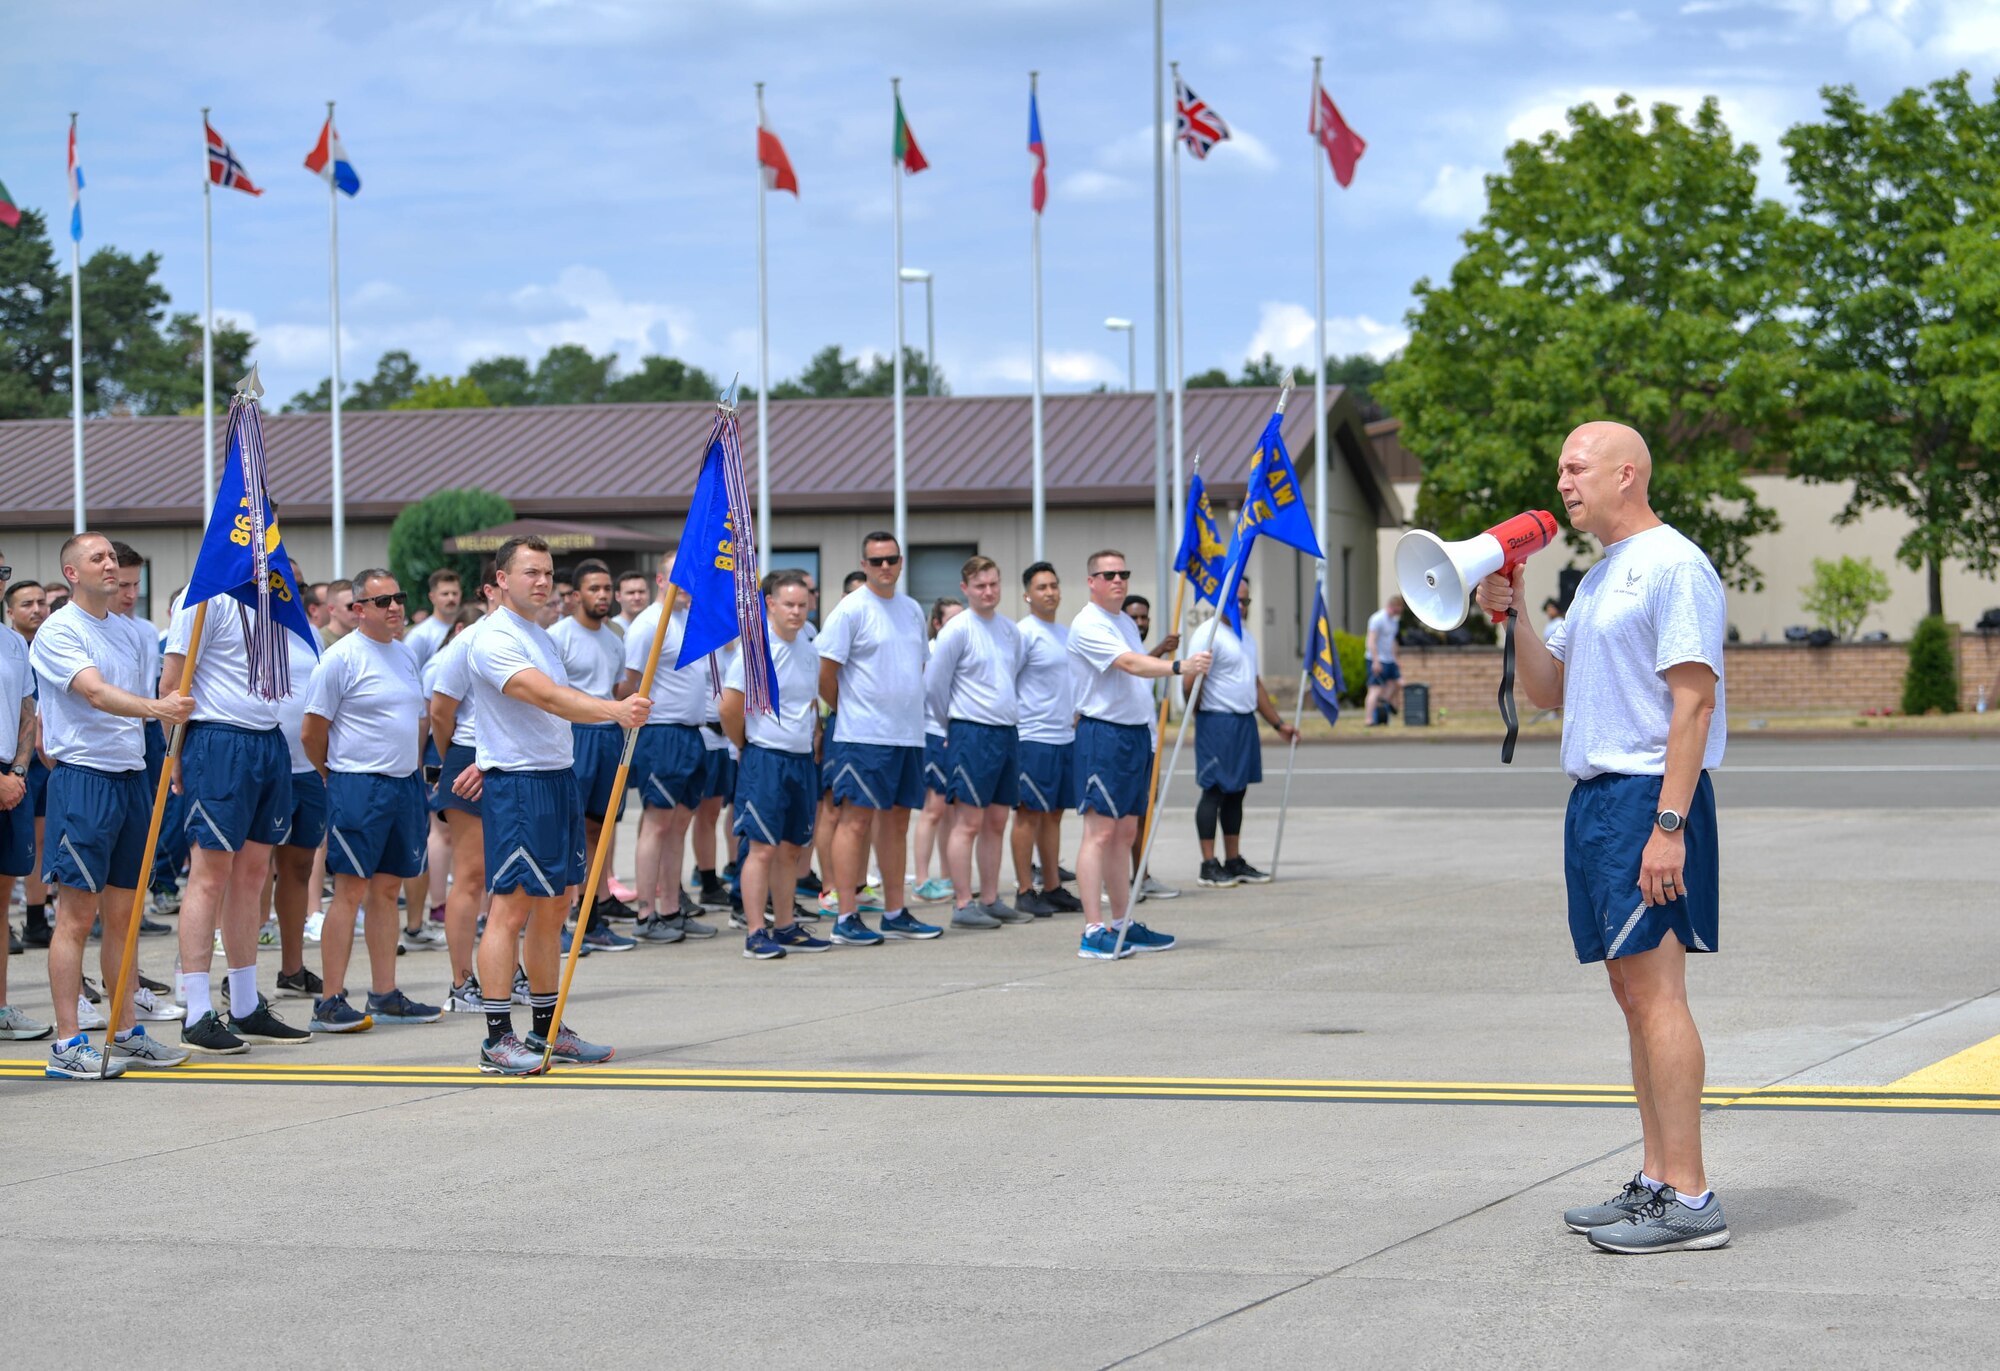 U.S. Air Force Brig. Gen. Josh Olson, 86th Airlift Wing commander, right, addresses members of the wing during a wing run at Ramstein Air Base, Germany, June 29, 2022.